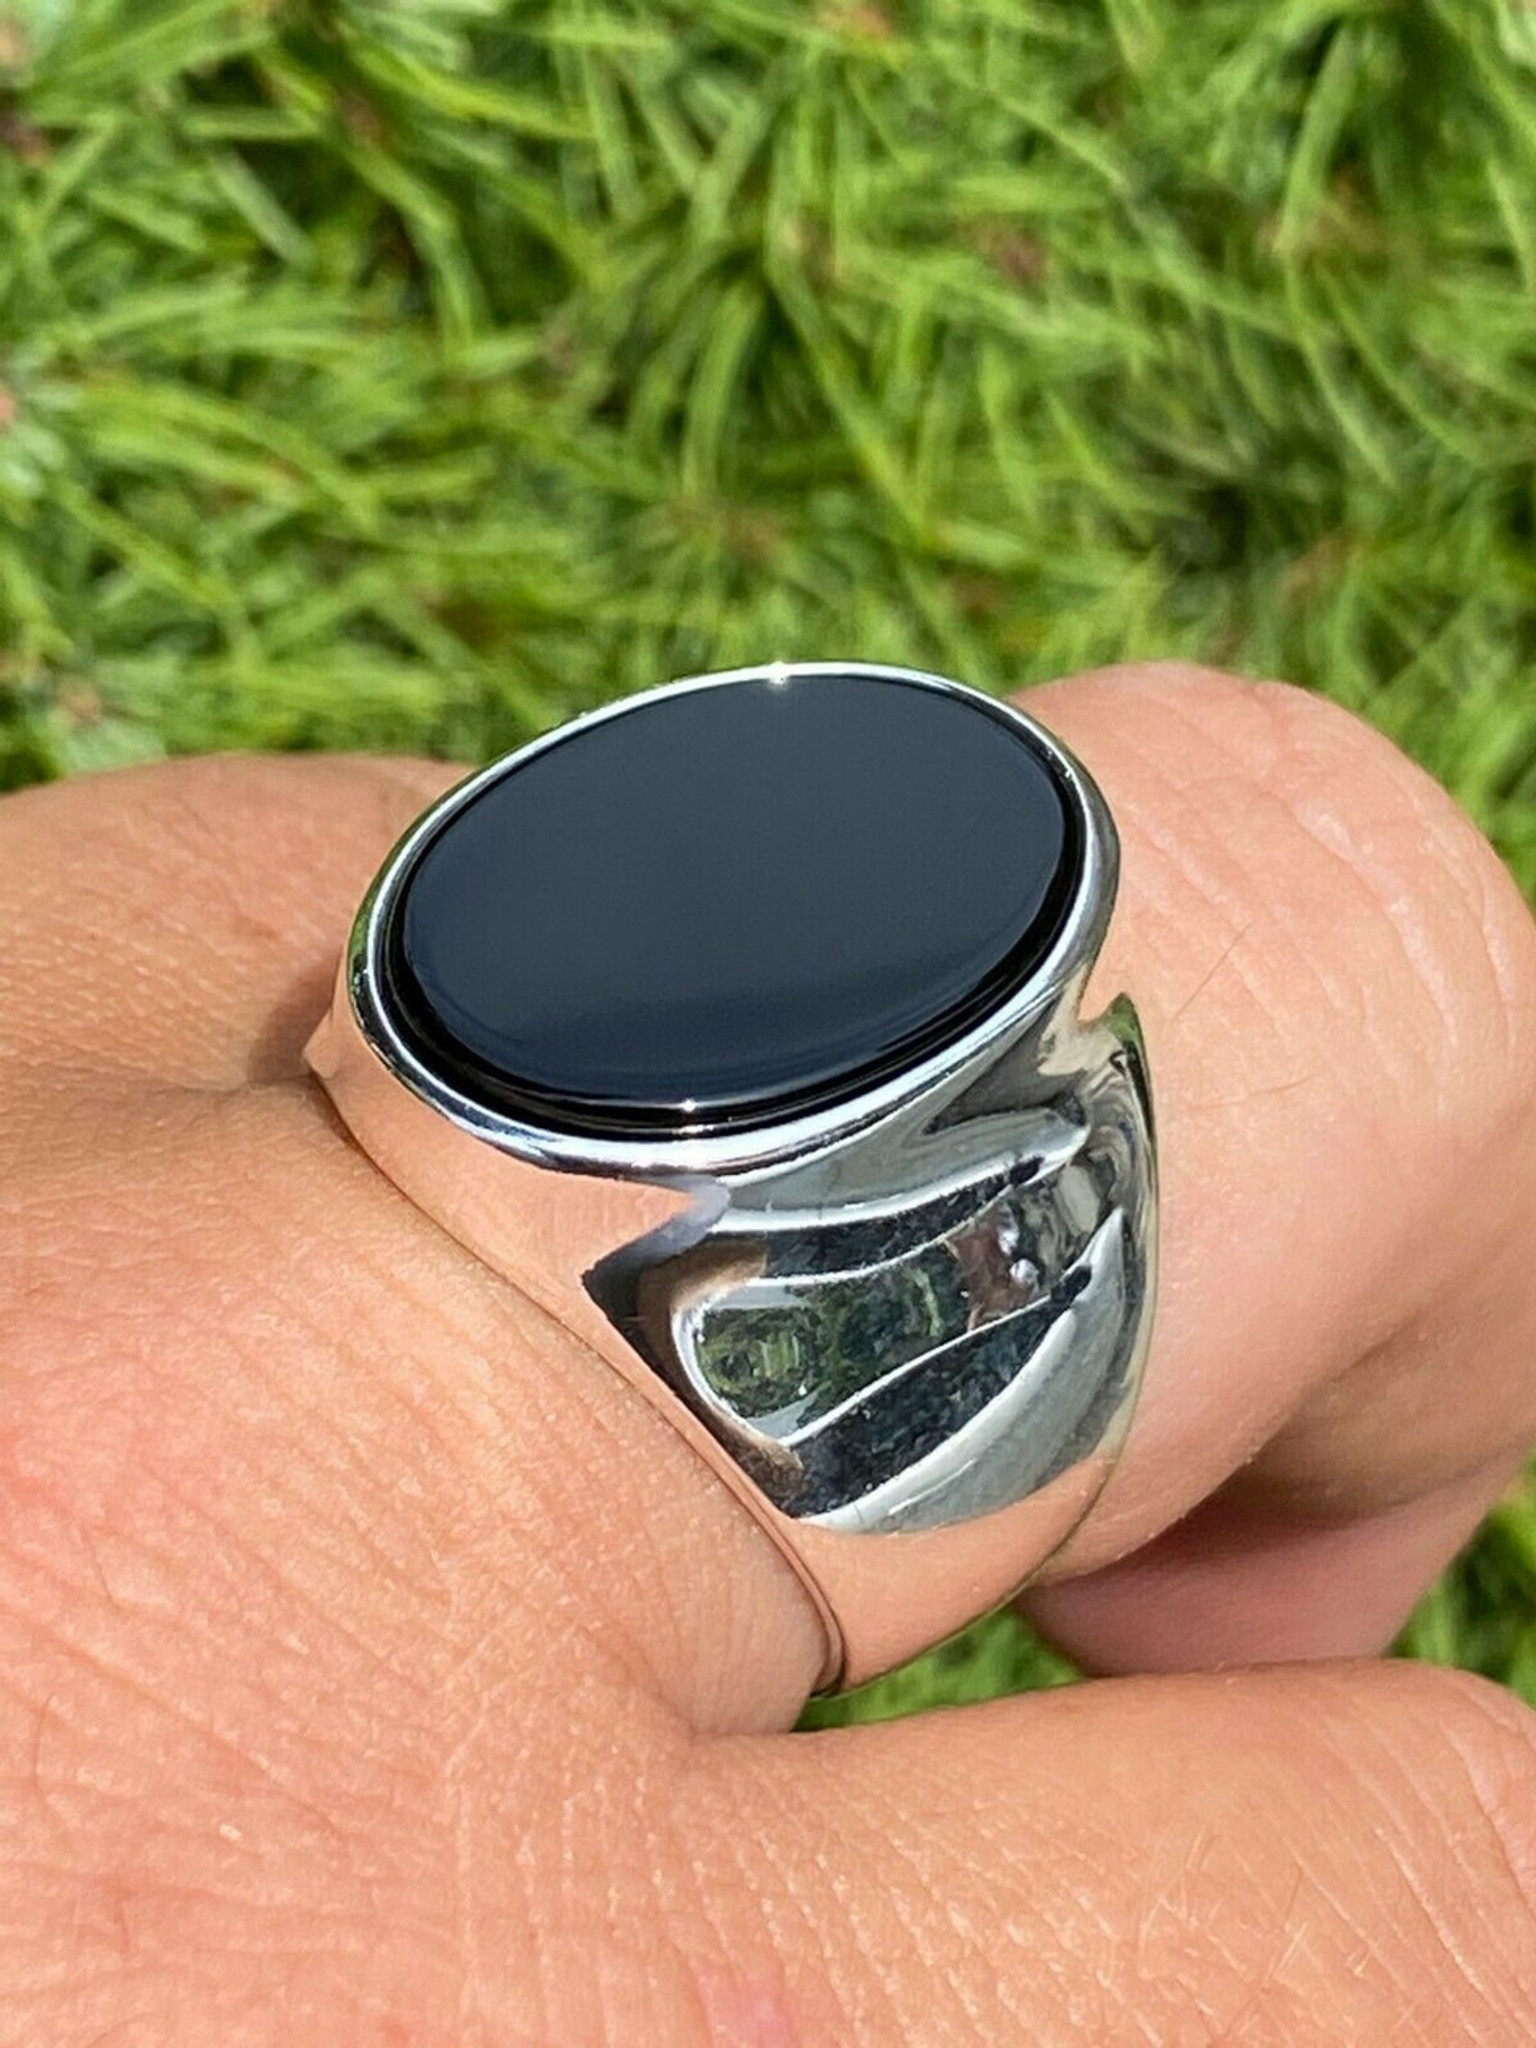 Men's Solid 925 Sterling Silver Real Black Onyx Signet Ring Sz 7-13 Pinky  Large